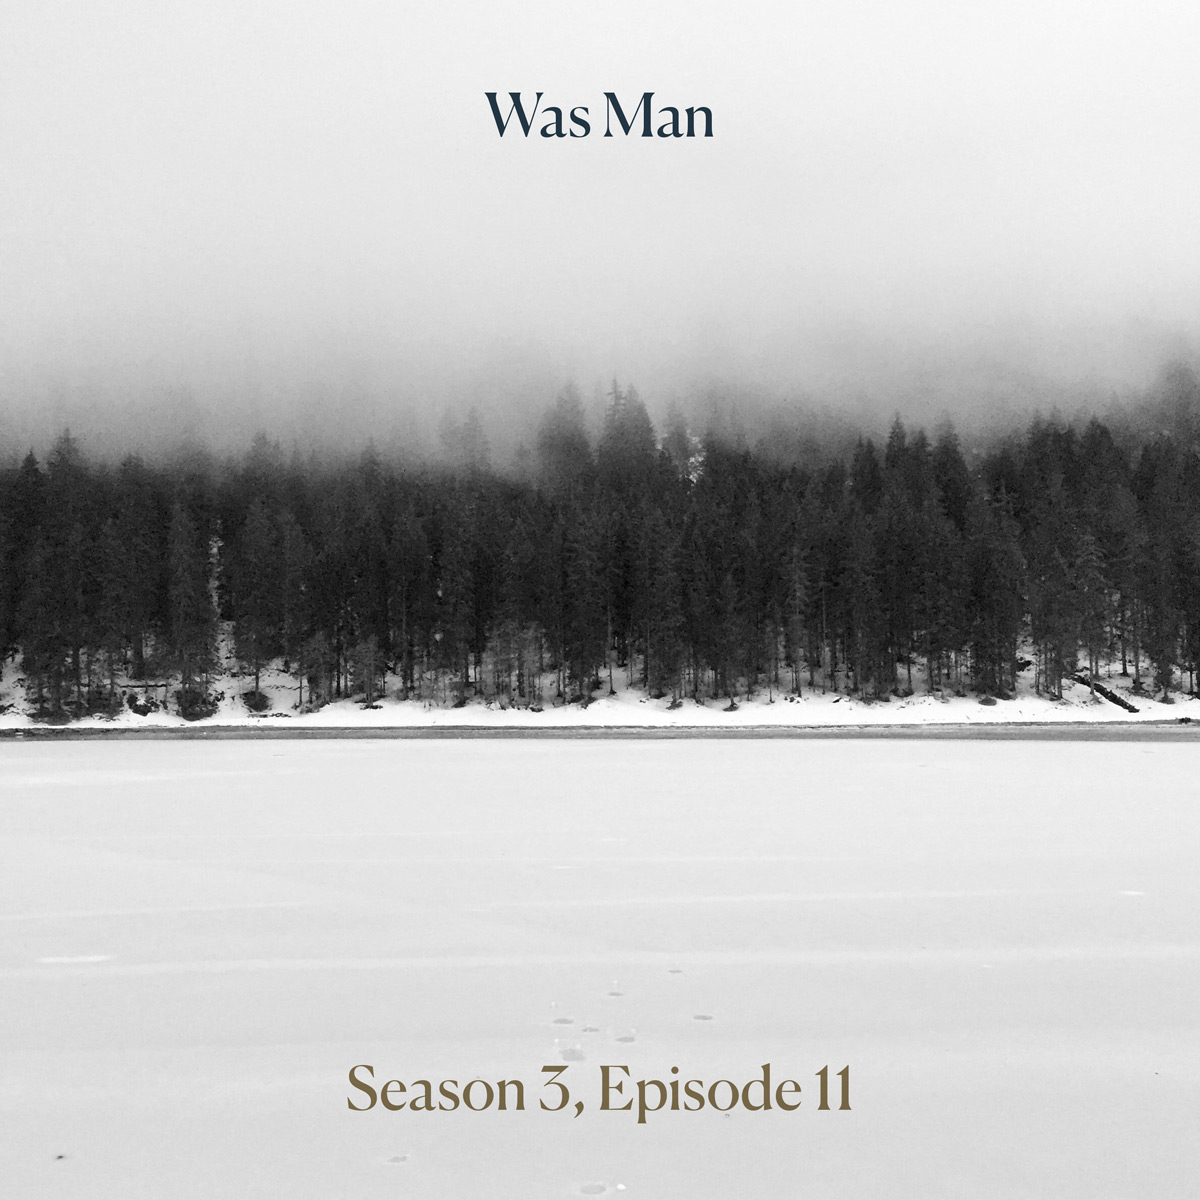 Cover image for Season 3, Episode 11 - a snowy lake and forest, with clouds